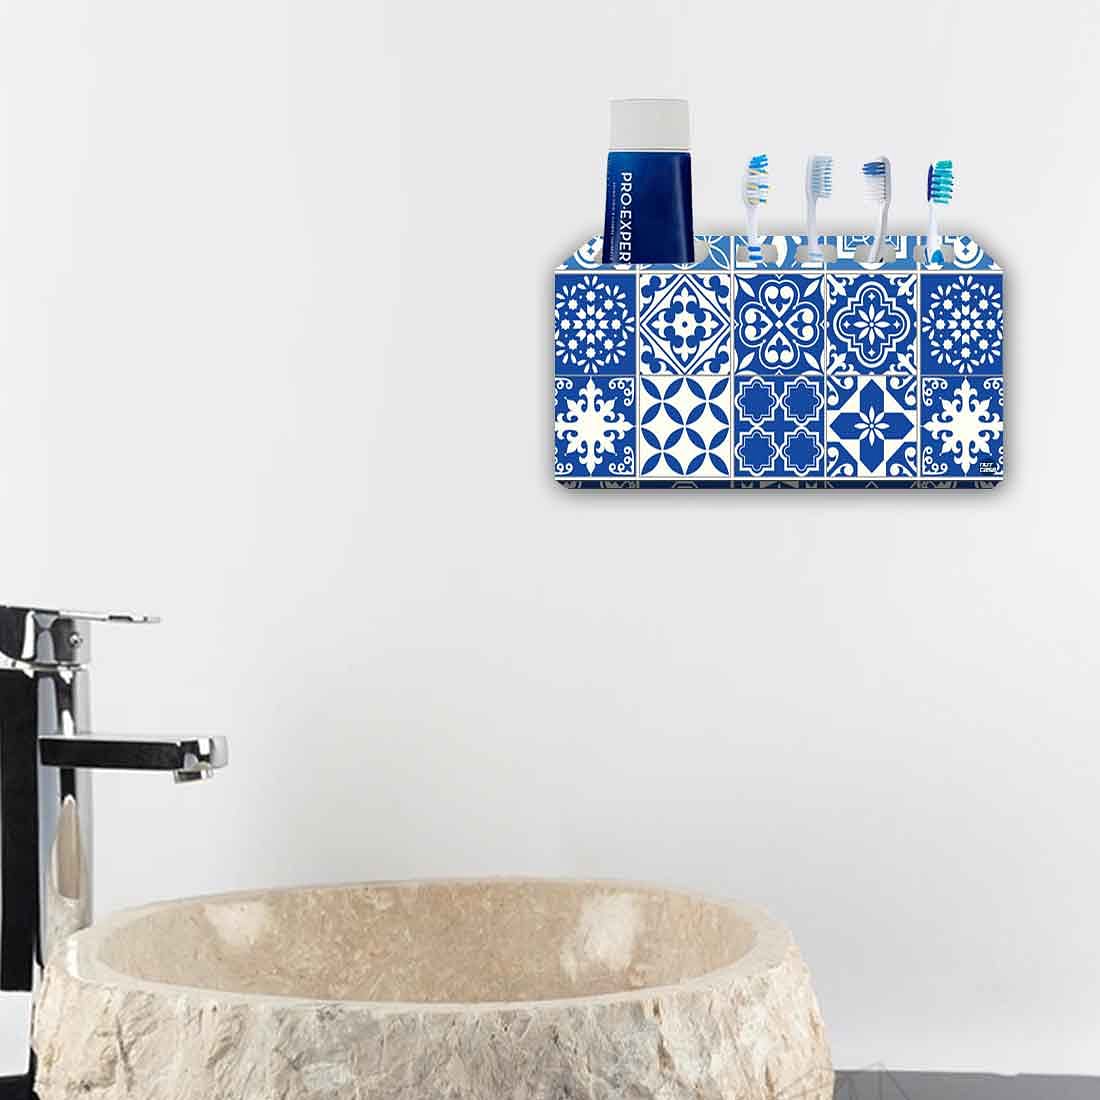 Toothbrush Holder Wall Mounted -Tiles of Seville Nutcase